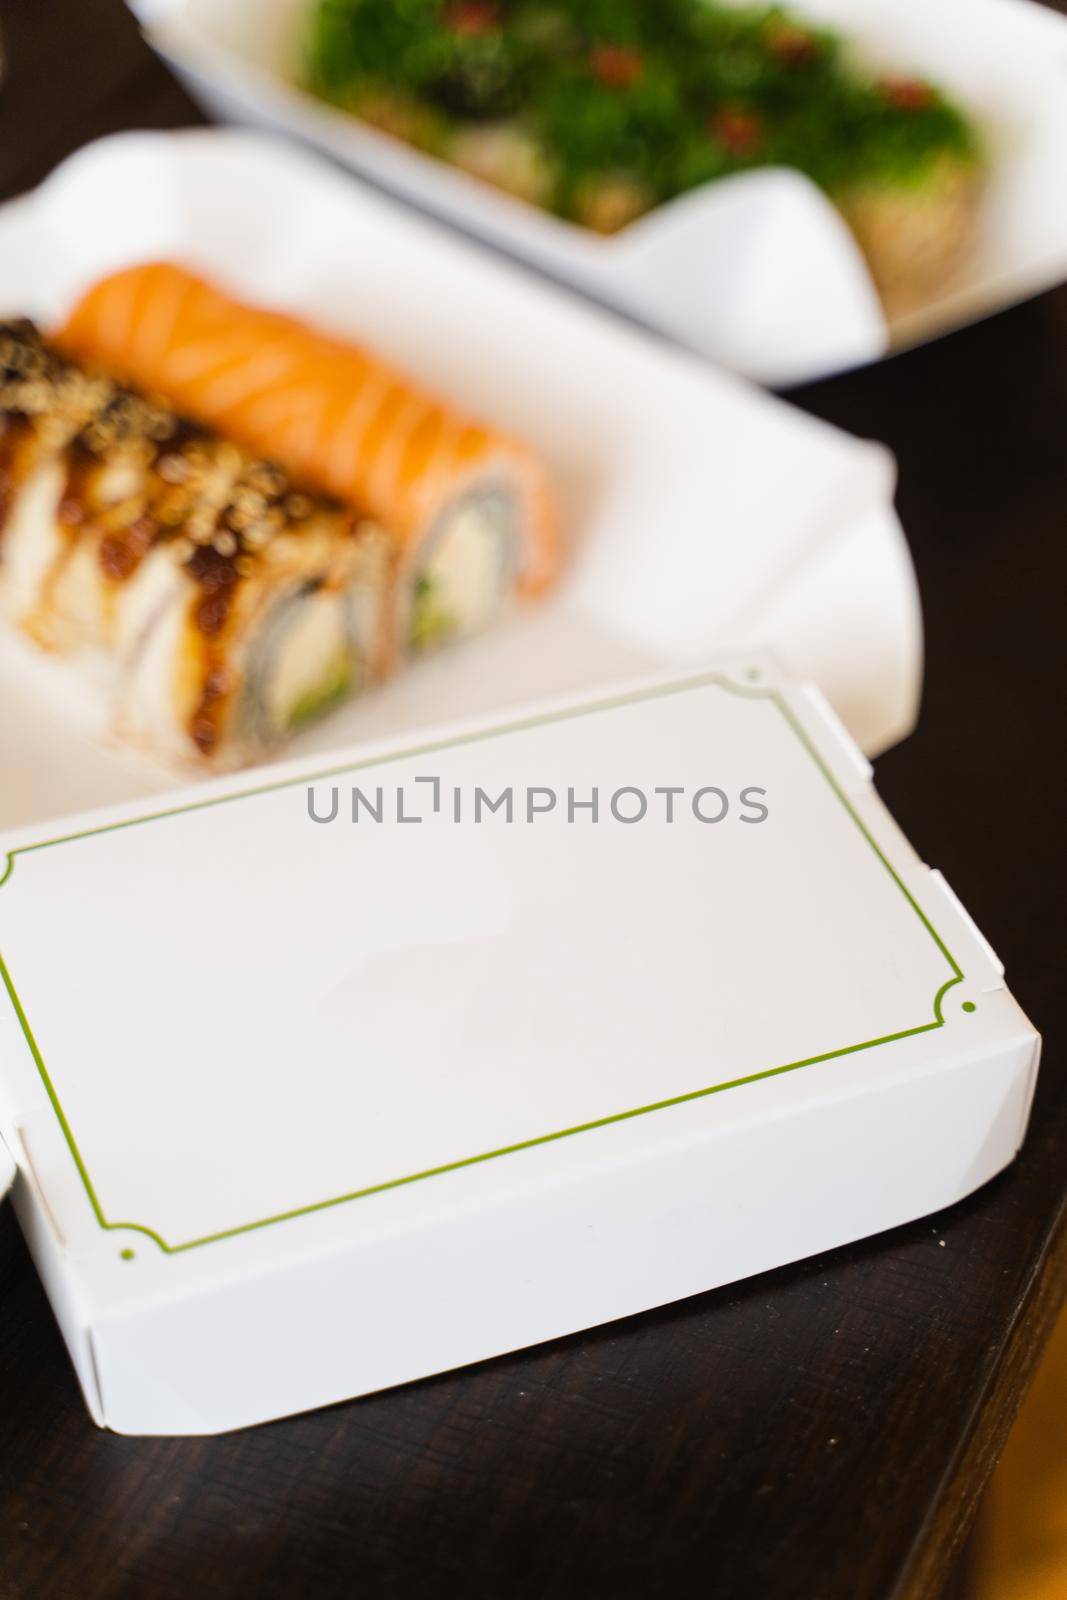 Cardboard box with blank place for logo of sushi delivery company. Sushi rolls on the background